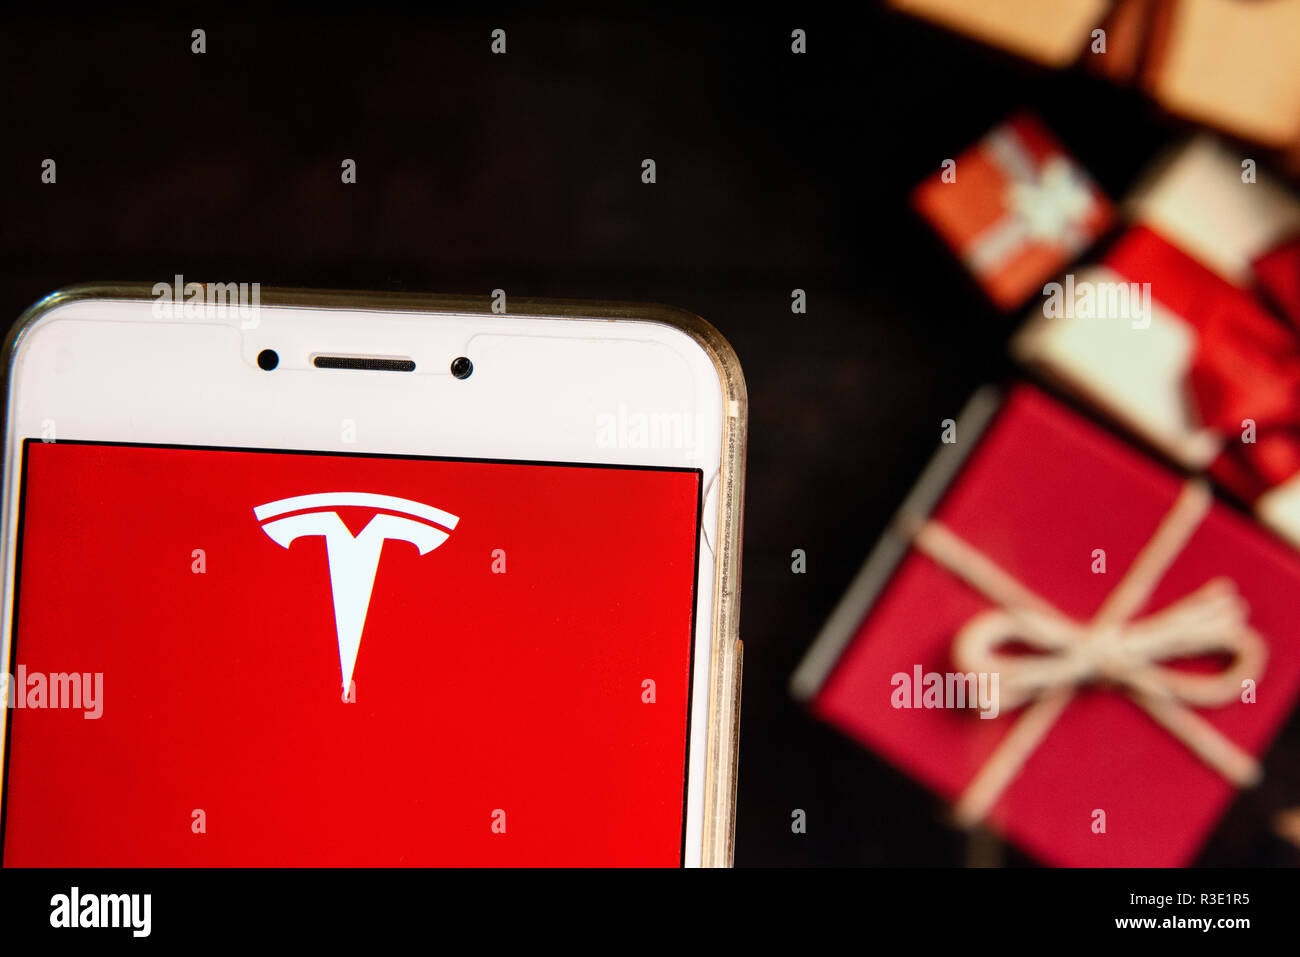 American electric car manufacturing  company Telsa logo is seen on an Android mobile device with a Christmas wrapped gifts in the background. Stock Photo